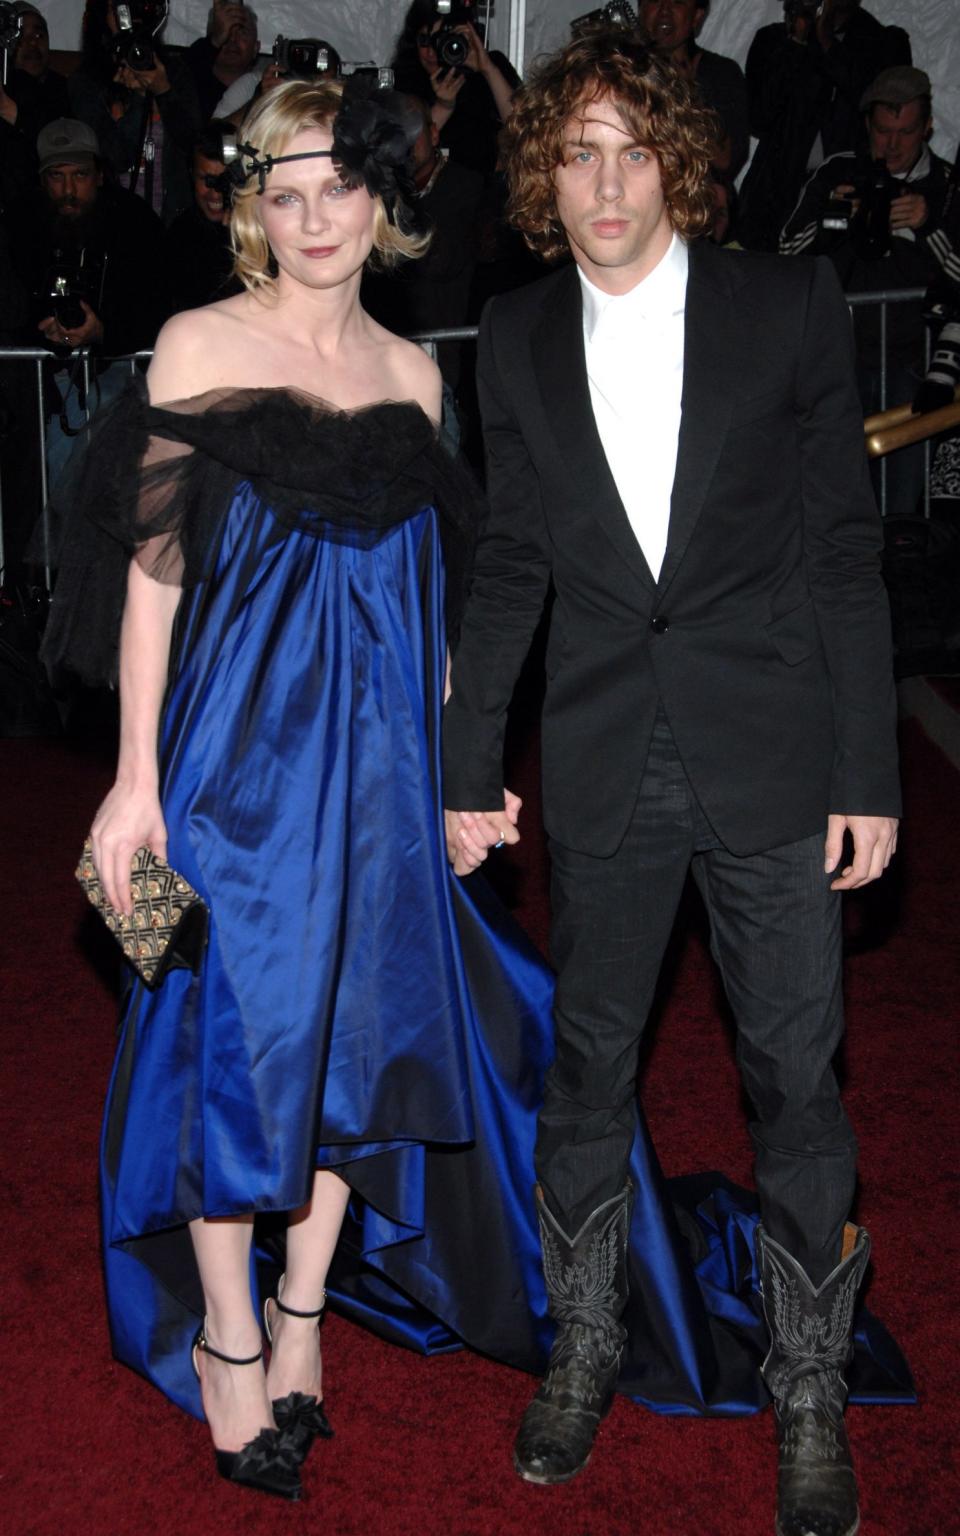 Johnny Borrell with his then girlfriend Kirsten Dunst - Lawrence Lucier/FilmMagic